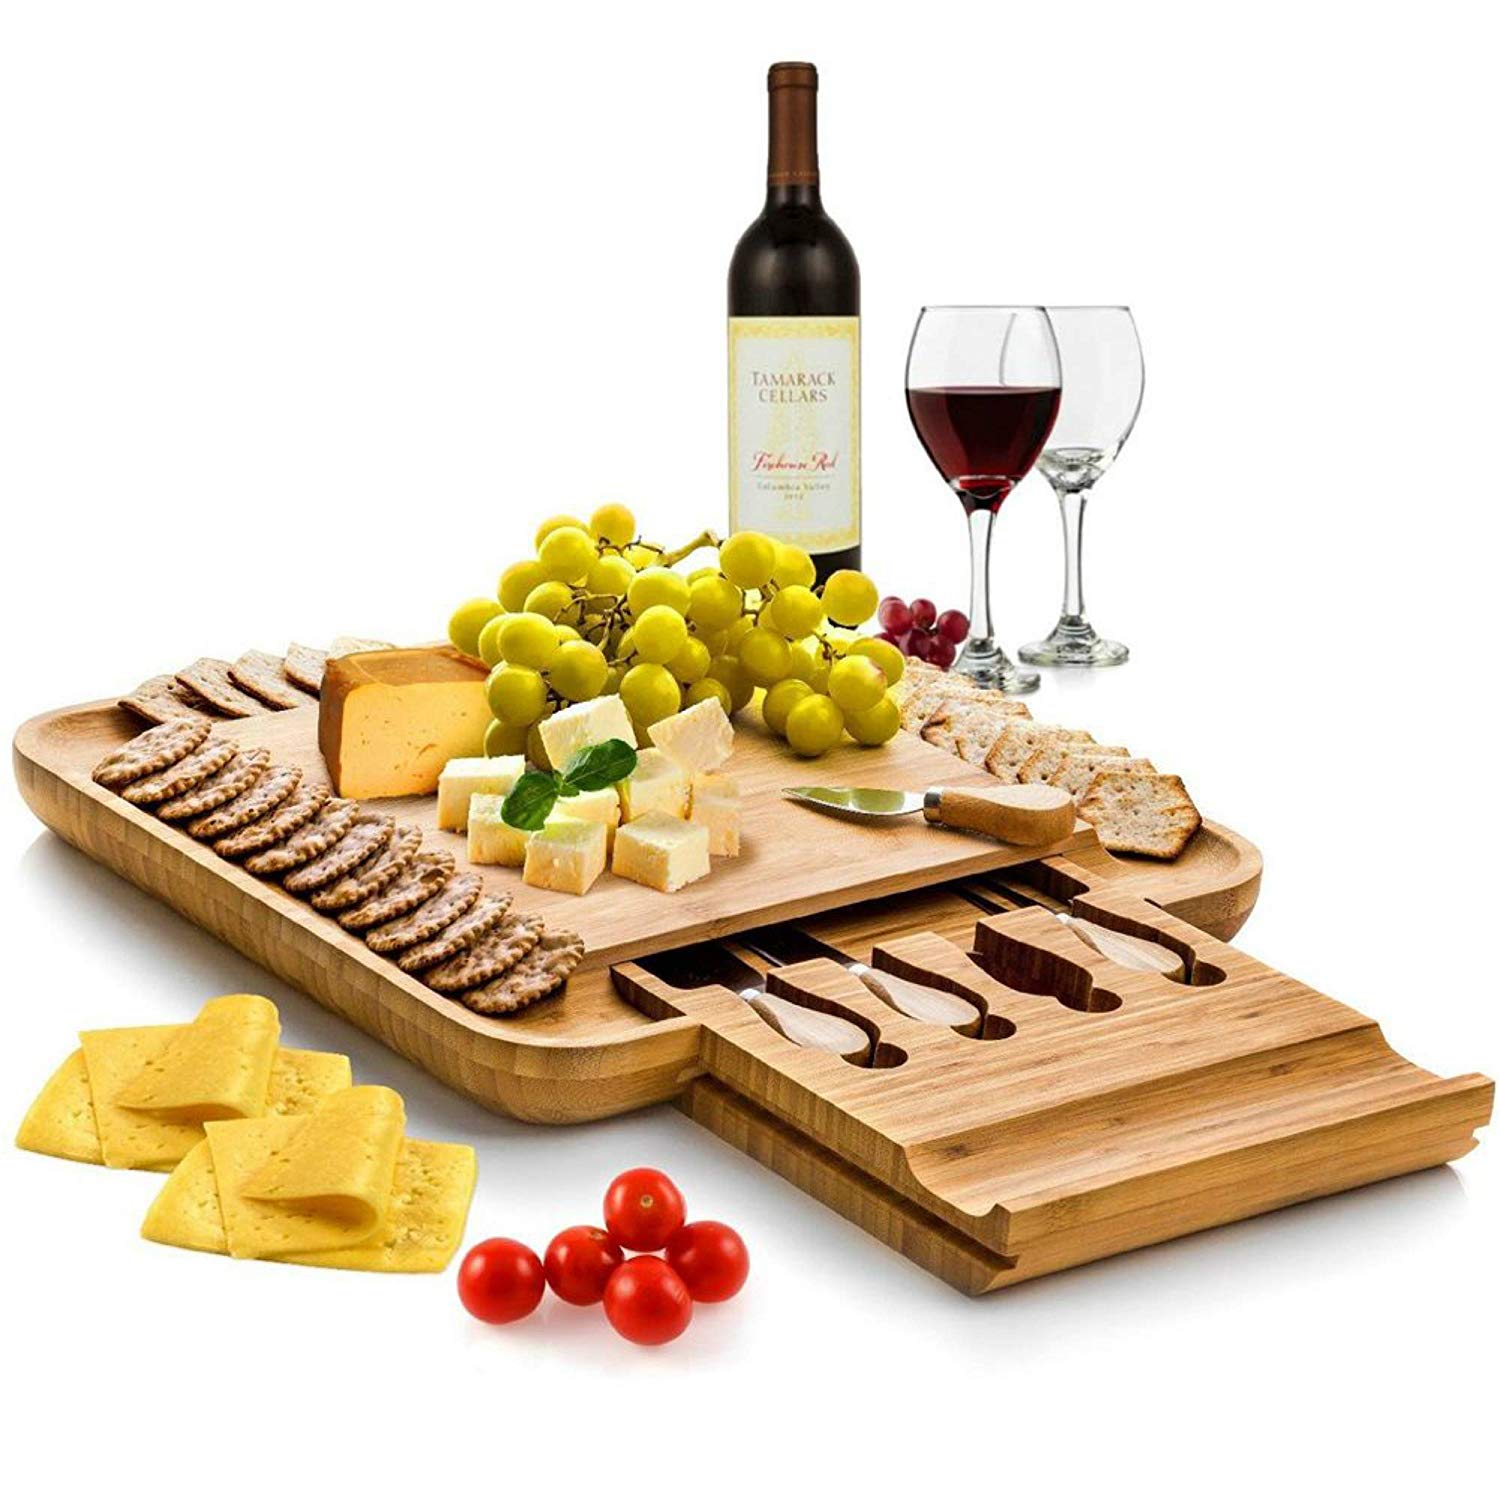 sister-in-law-gifts-cheese-board